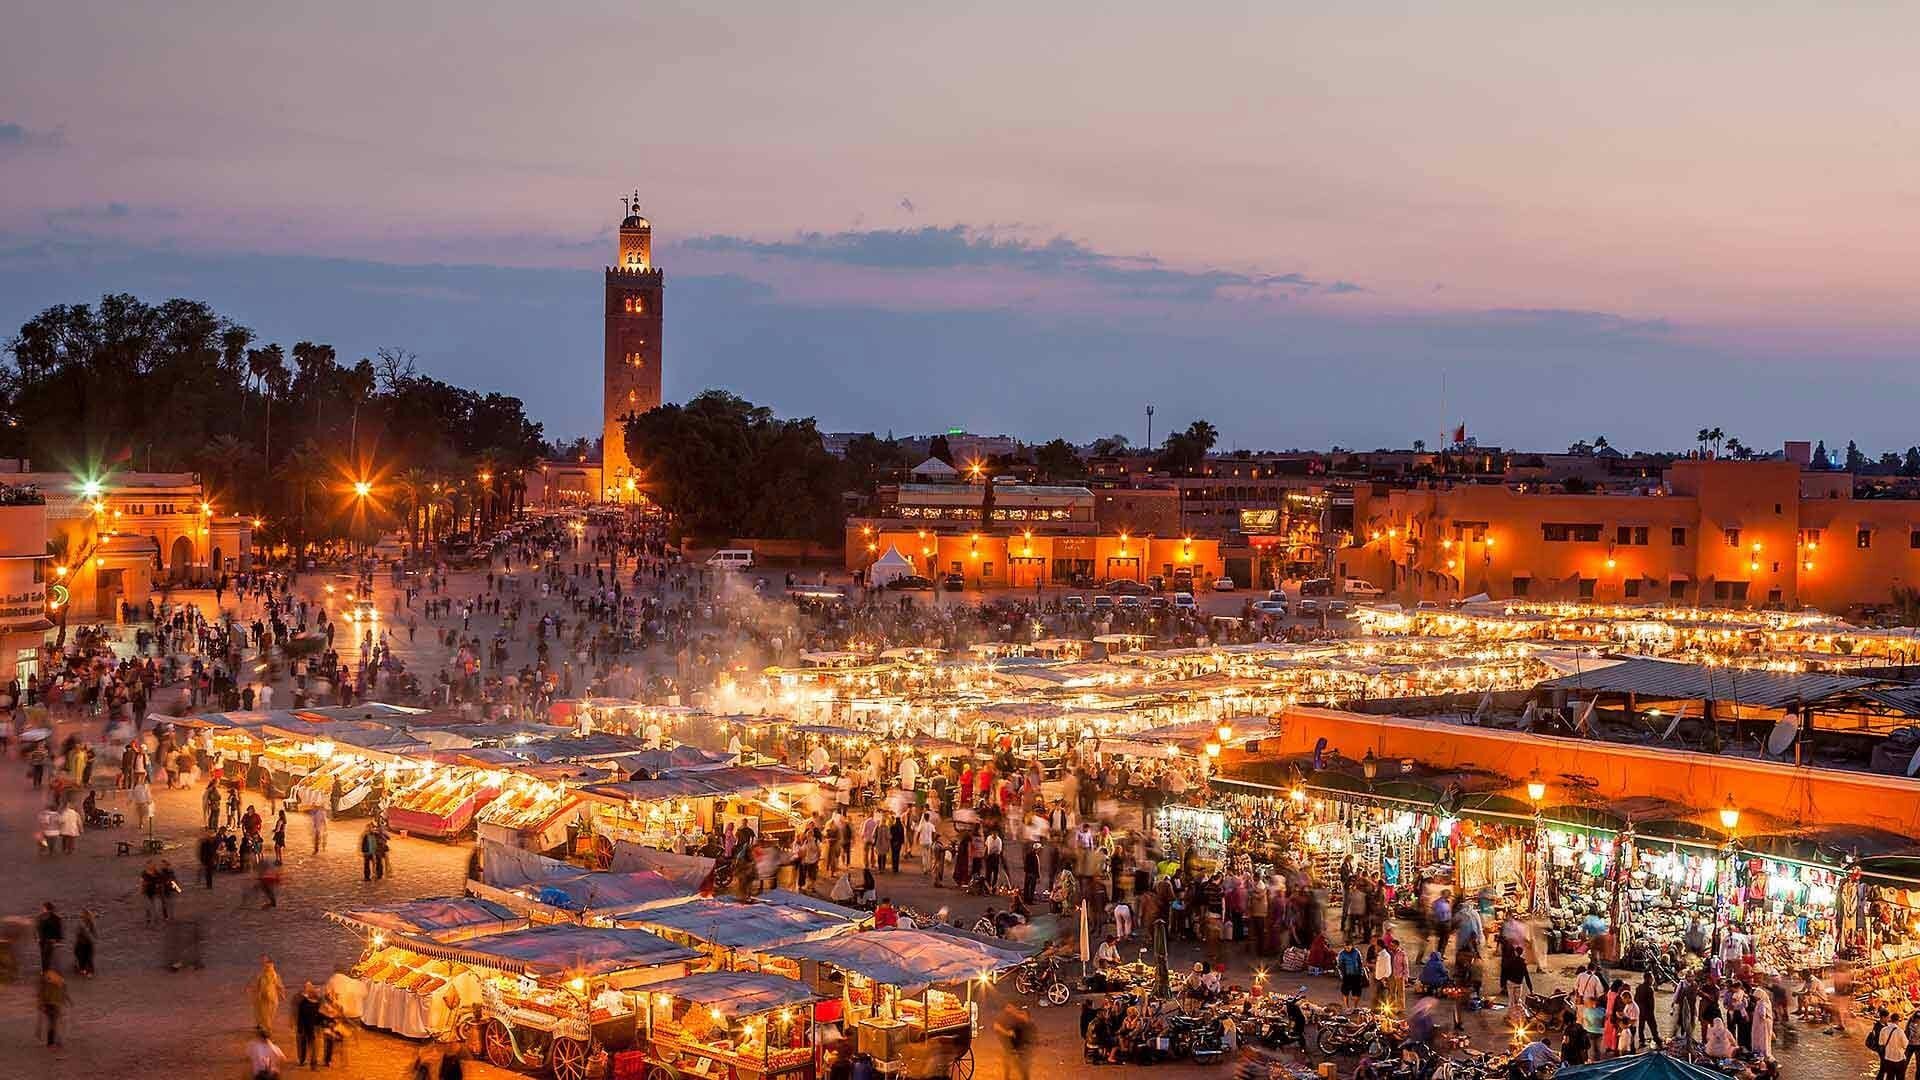 FES FROM MARRAKECH TO THE SAHARA IN 3 DAYS